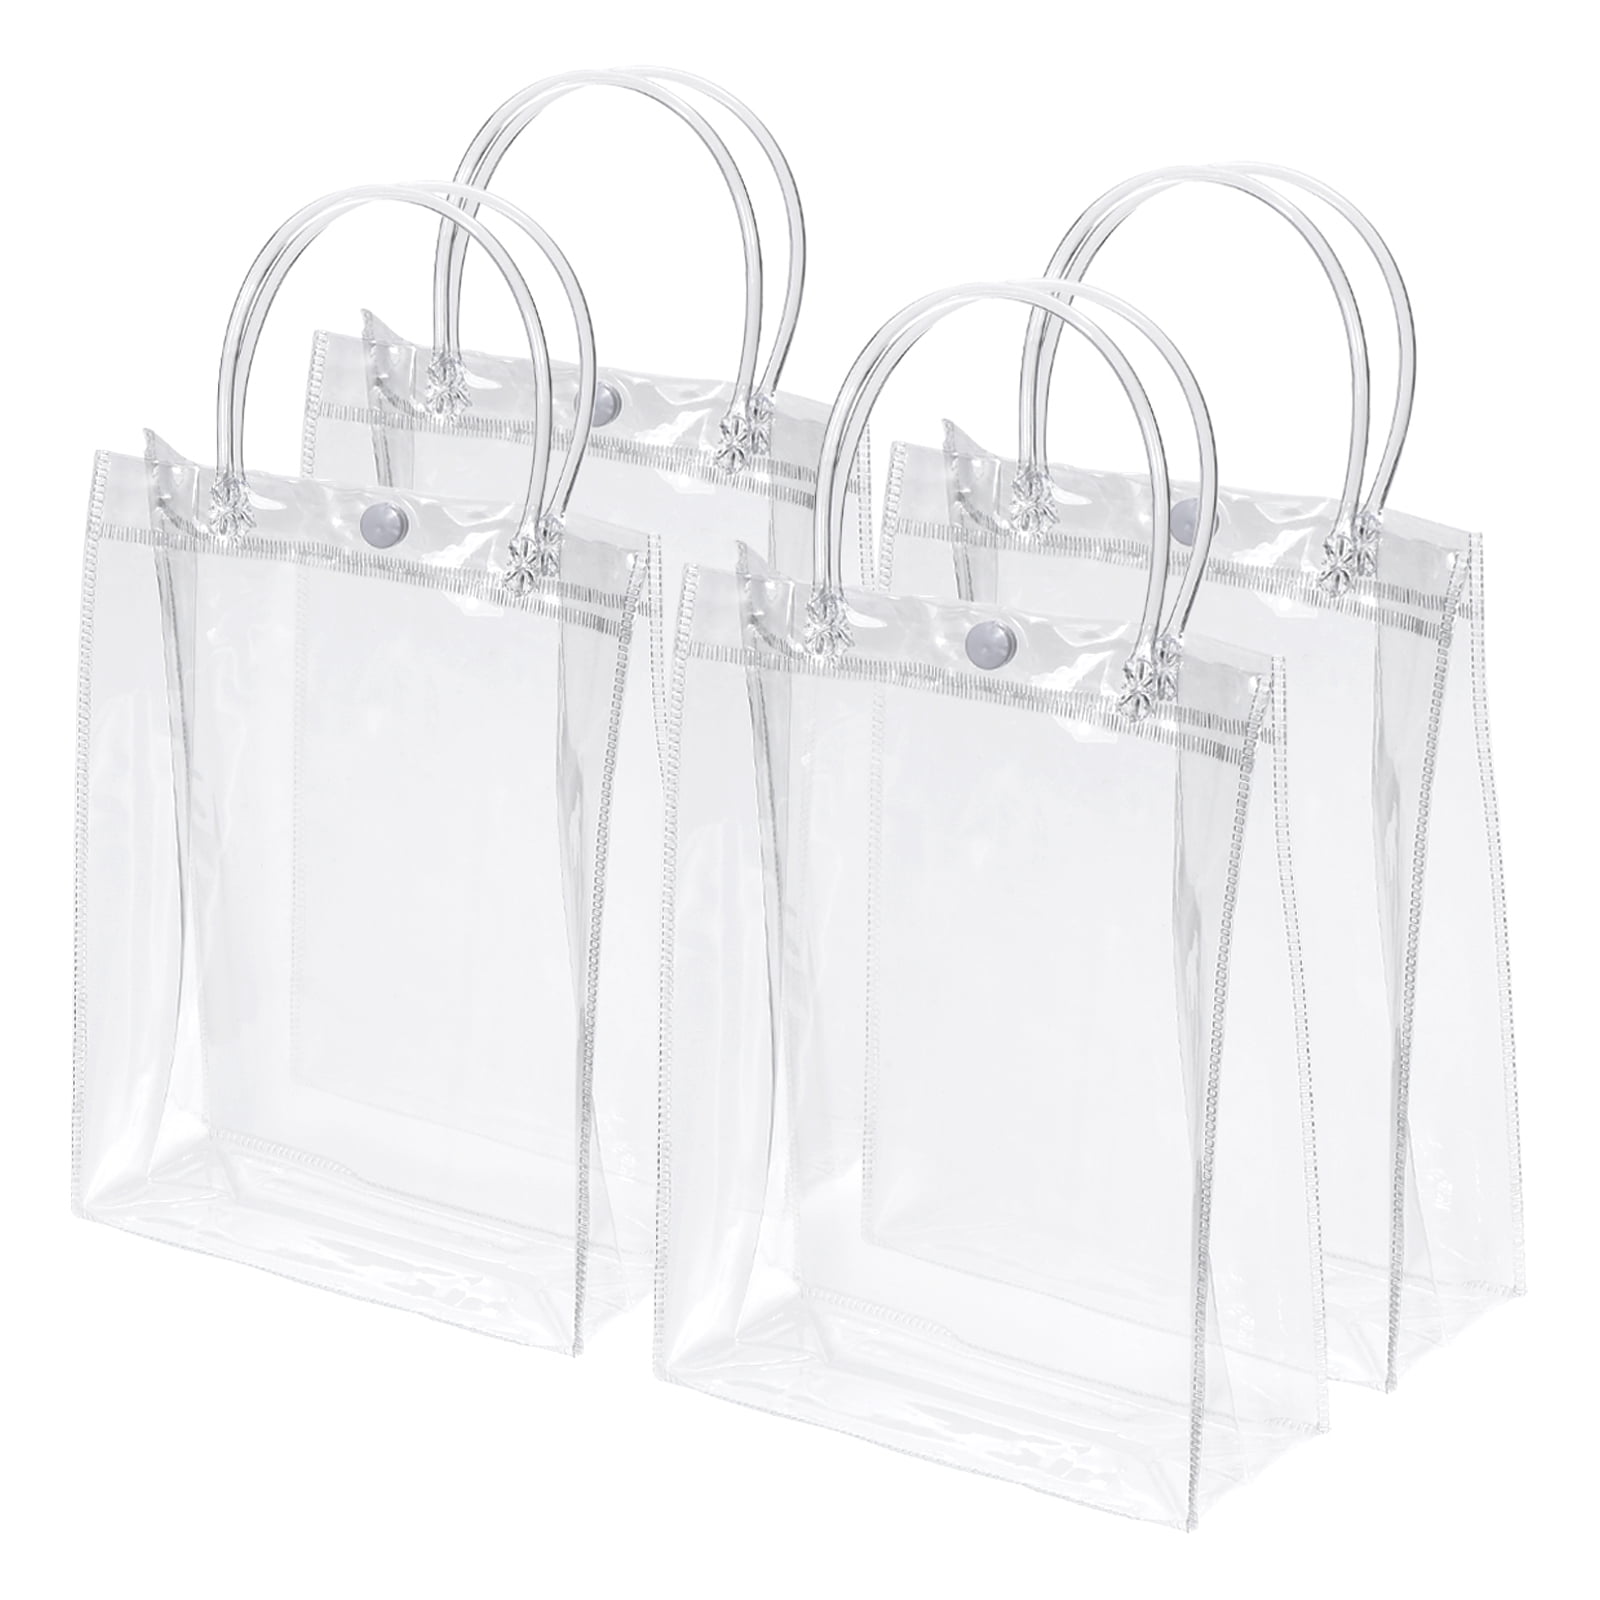 Clear PVC Gift Bags 9x6.7x2.8 Reusable Mini Plastic Gift Wrap Tote Bag  with Handles, 100 Pack 